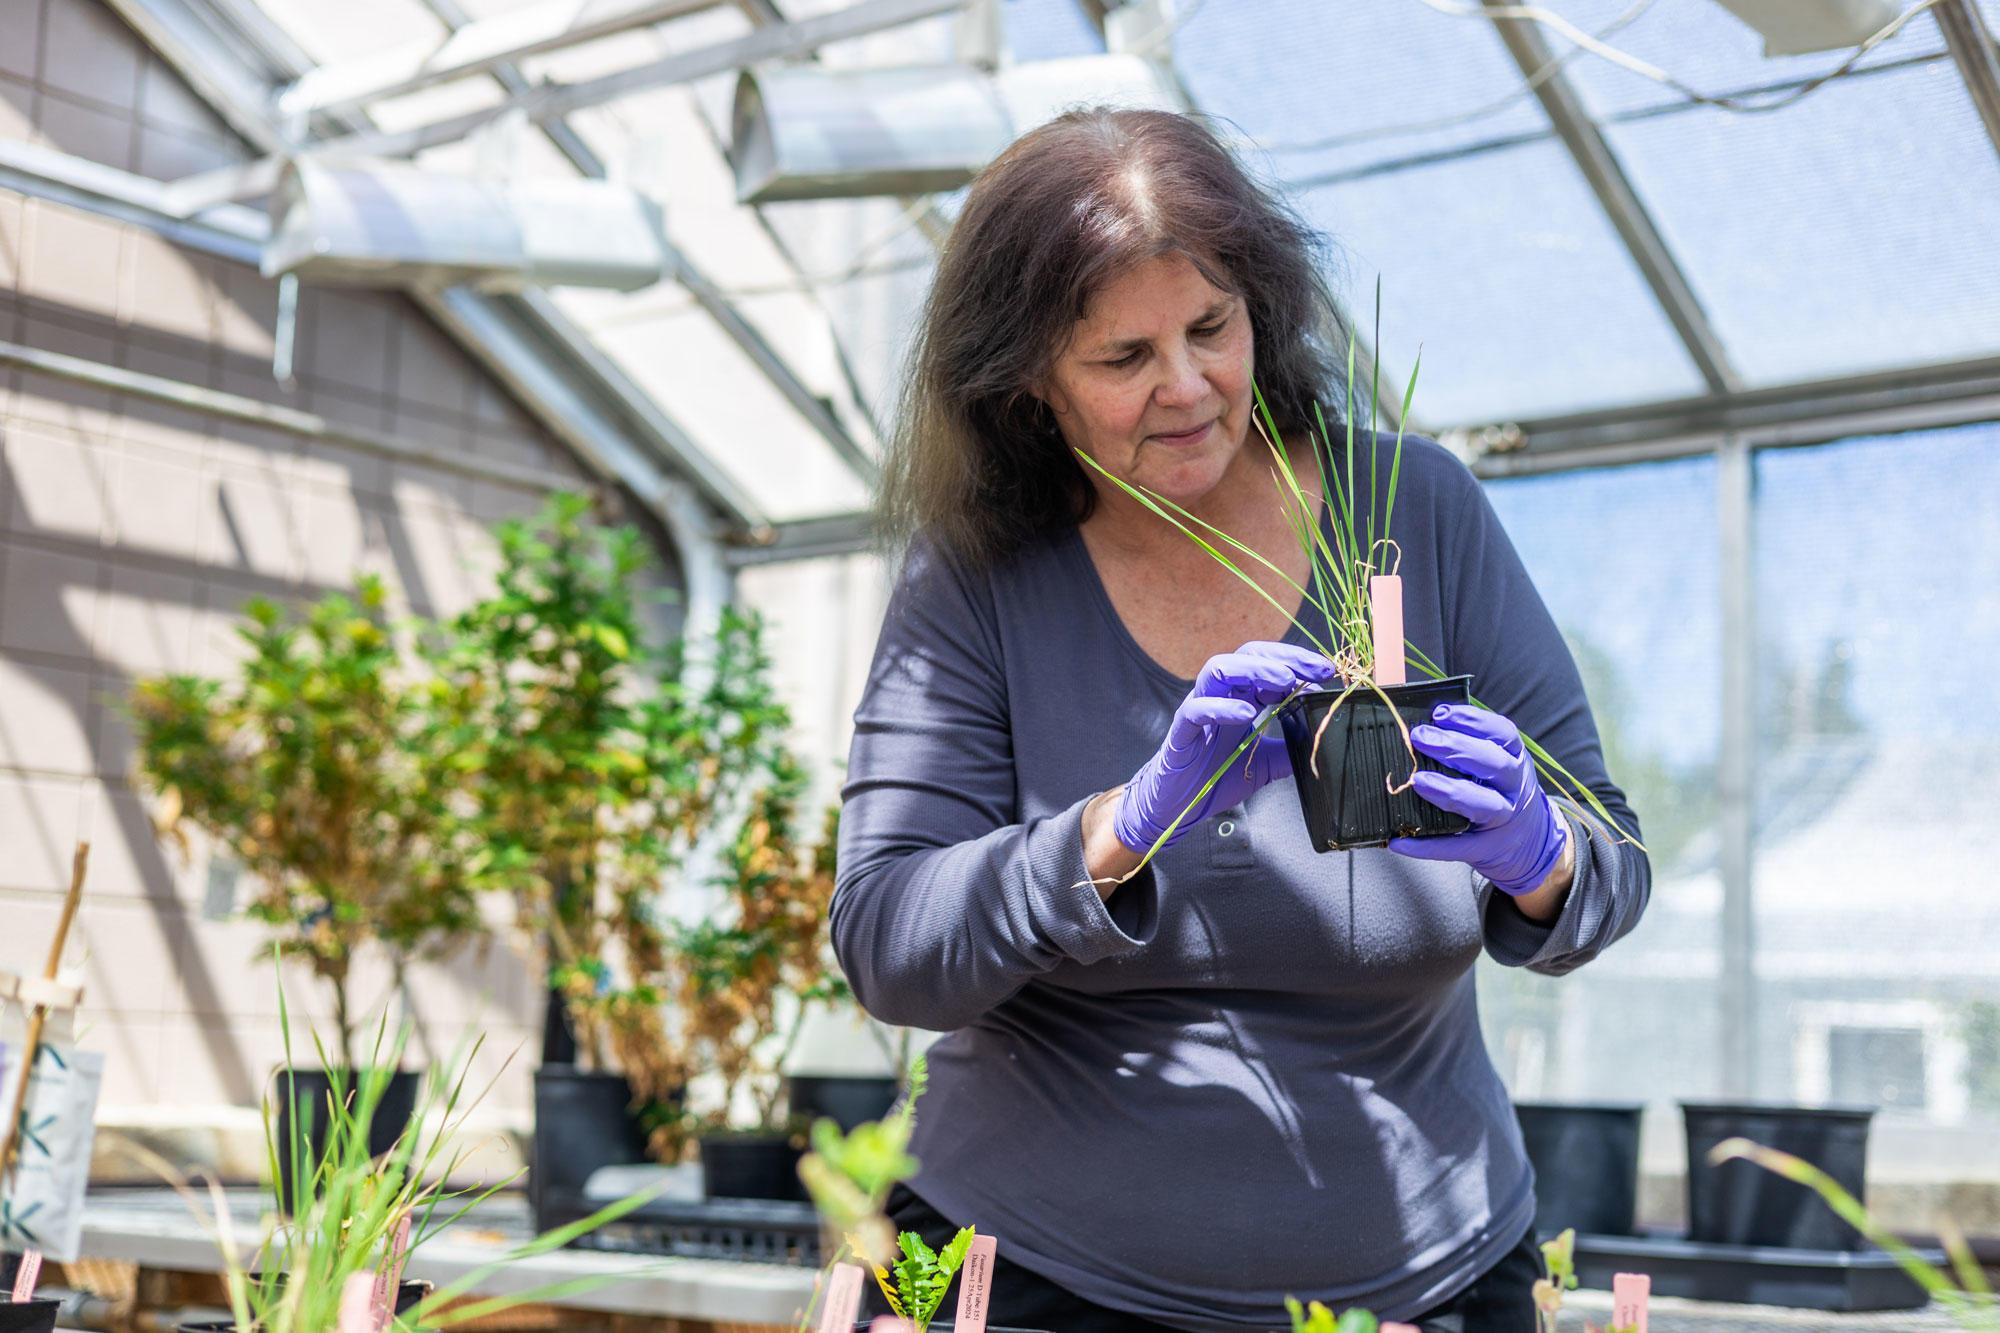 A white woman, Cynthia Ocamb, tilts her head to look at a plant in a container. She's standing among plants in a greenhouse. Light shines in from windows behind her.